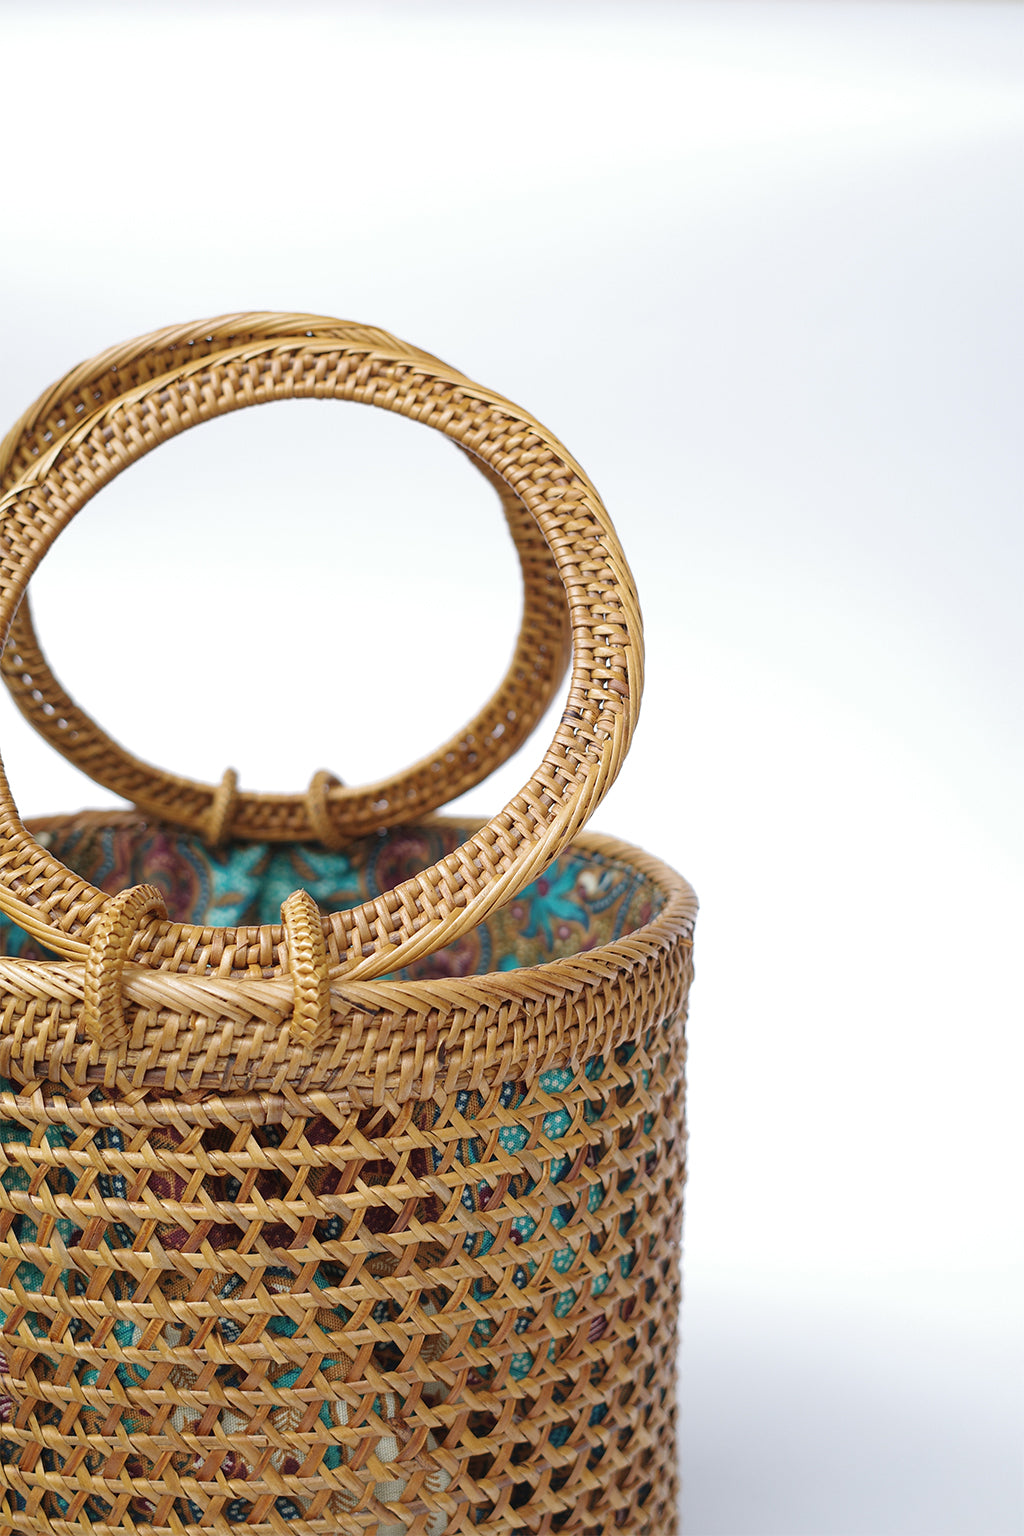 Round Rattan Bag - SWELLY